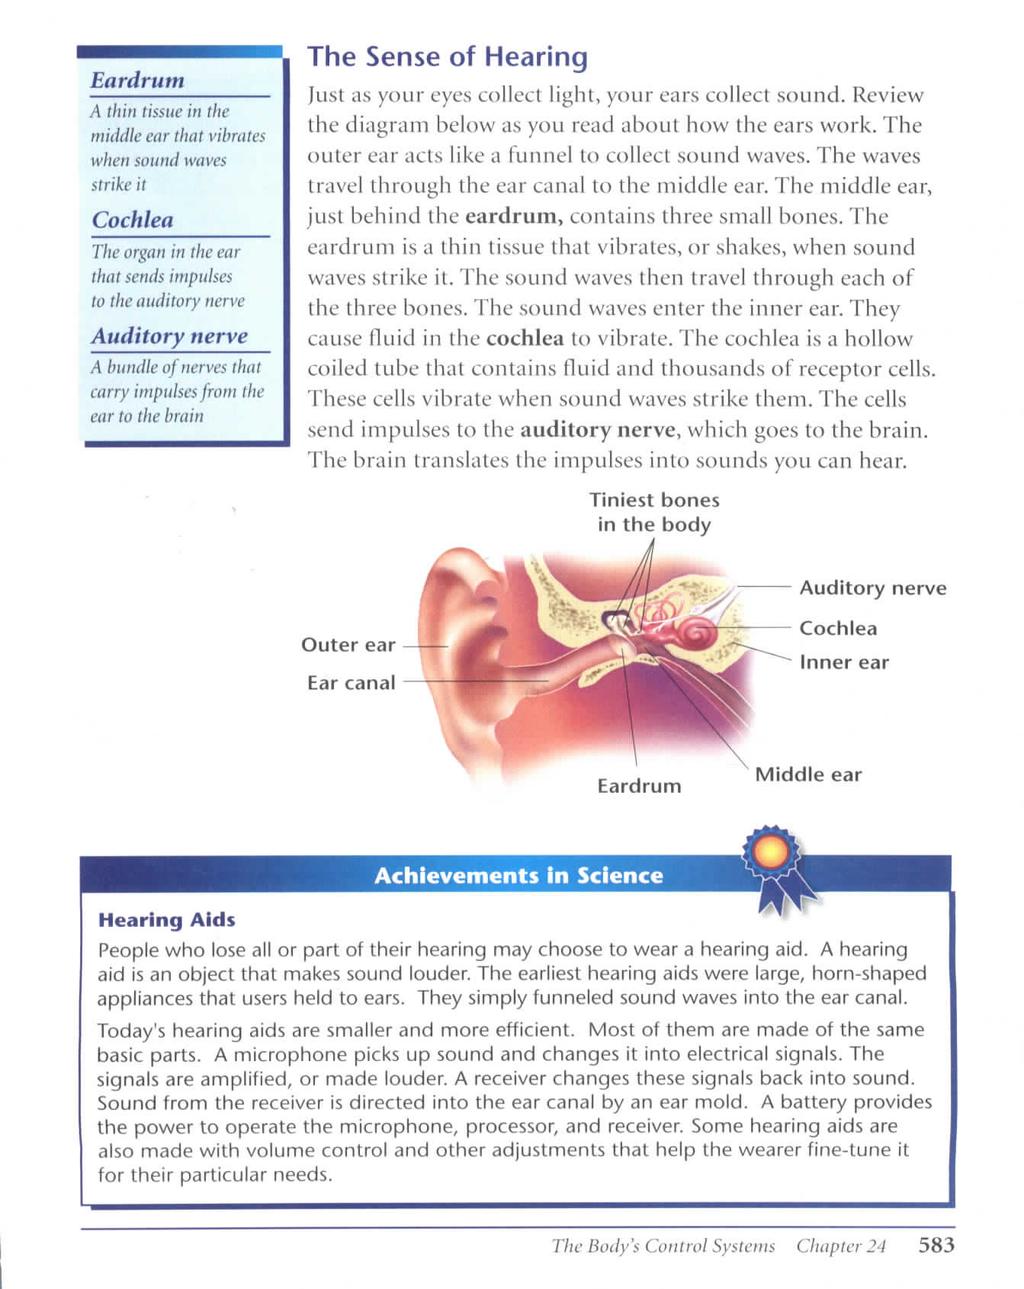 Eardrum A thin tissue in the middle ear that vibrates when sound waves strike it Cochlea The organ in the ear that sends impulses to the auditory nerve Auditory nerve A bundle of nerves that carry